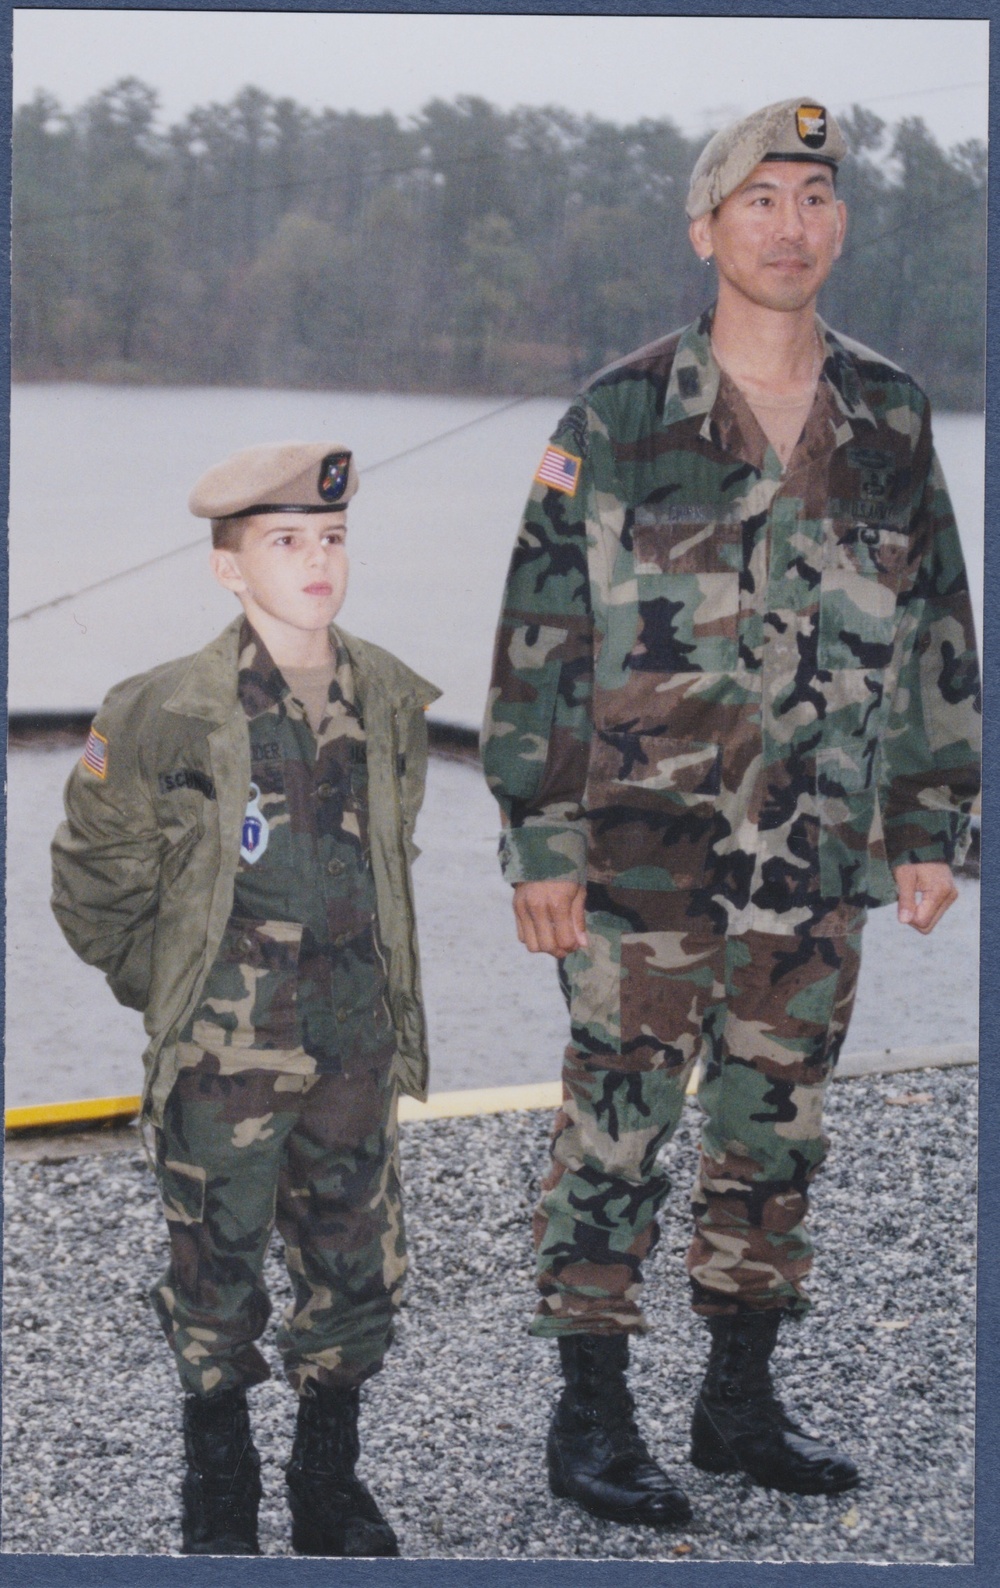 Make-A-Wish recipient reunites with Army general years later